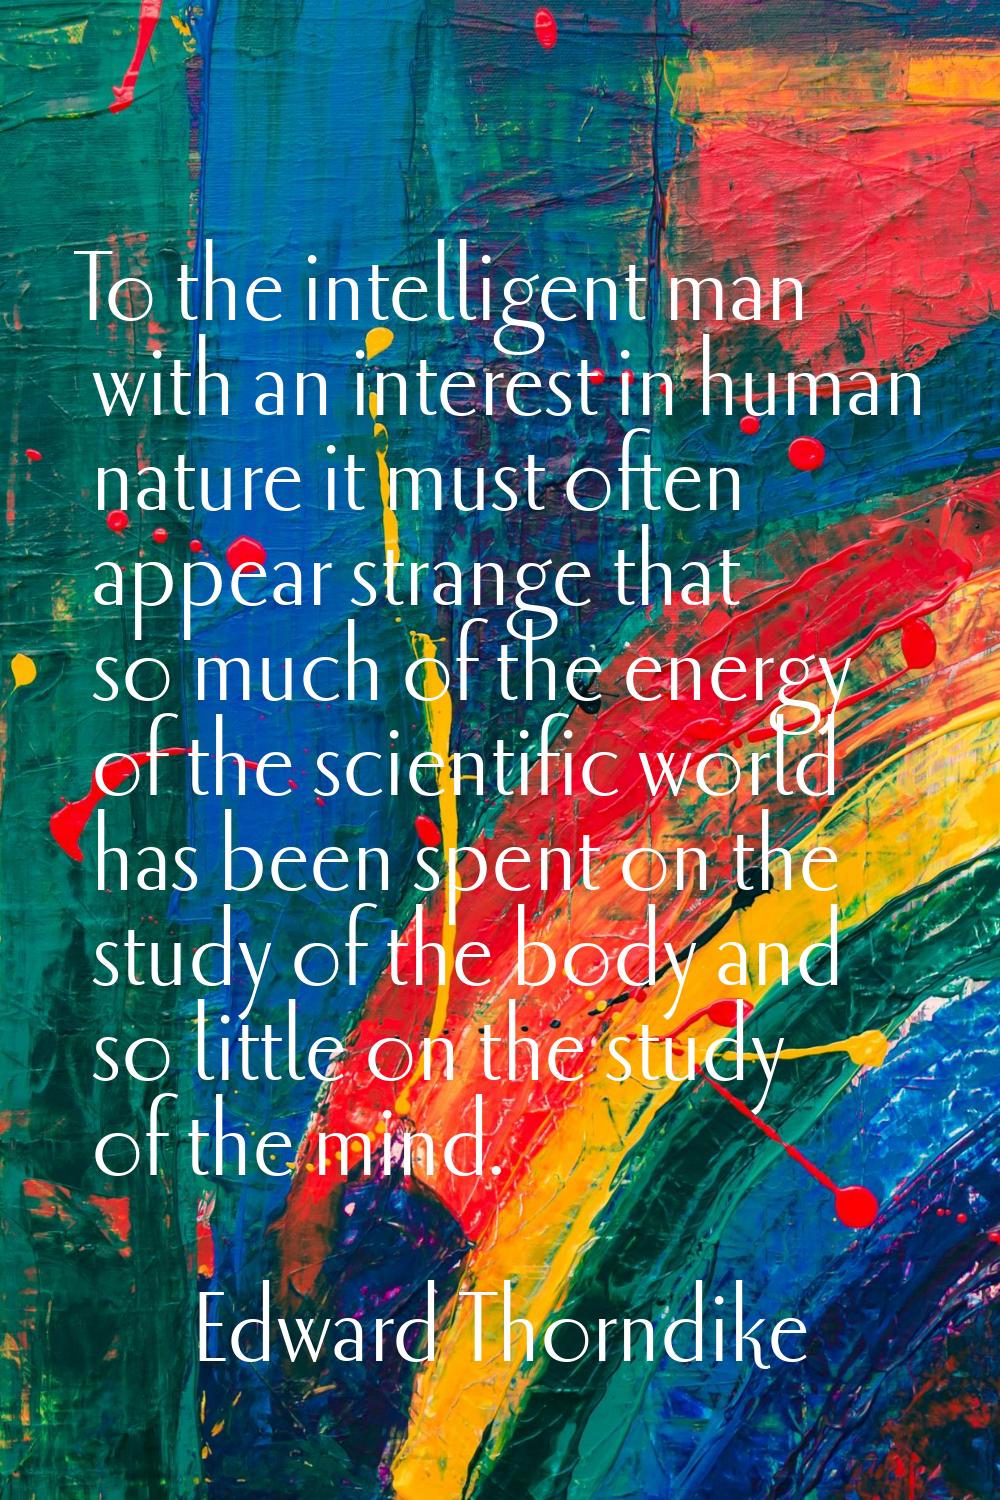 To the intelligent man with an interest in human nature it must often appear strange that so much o